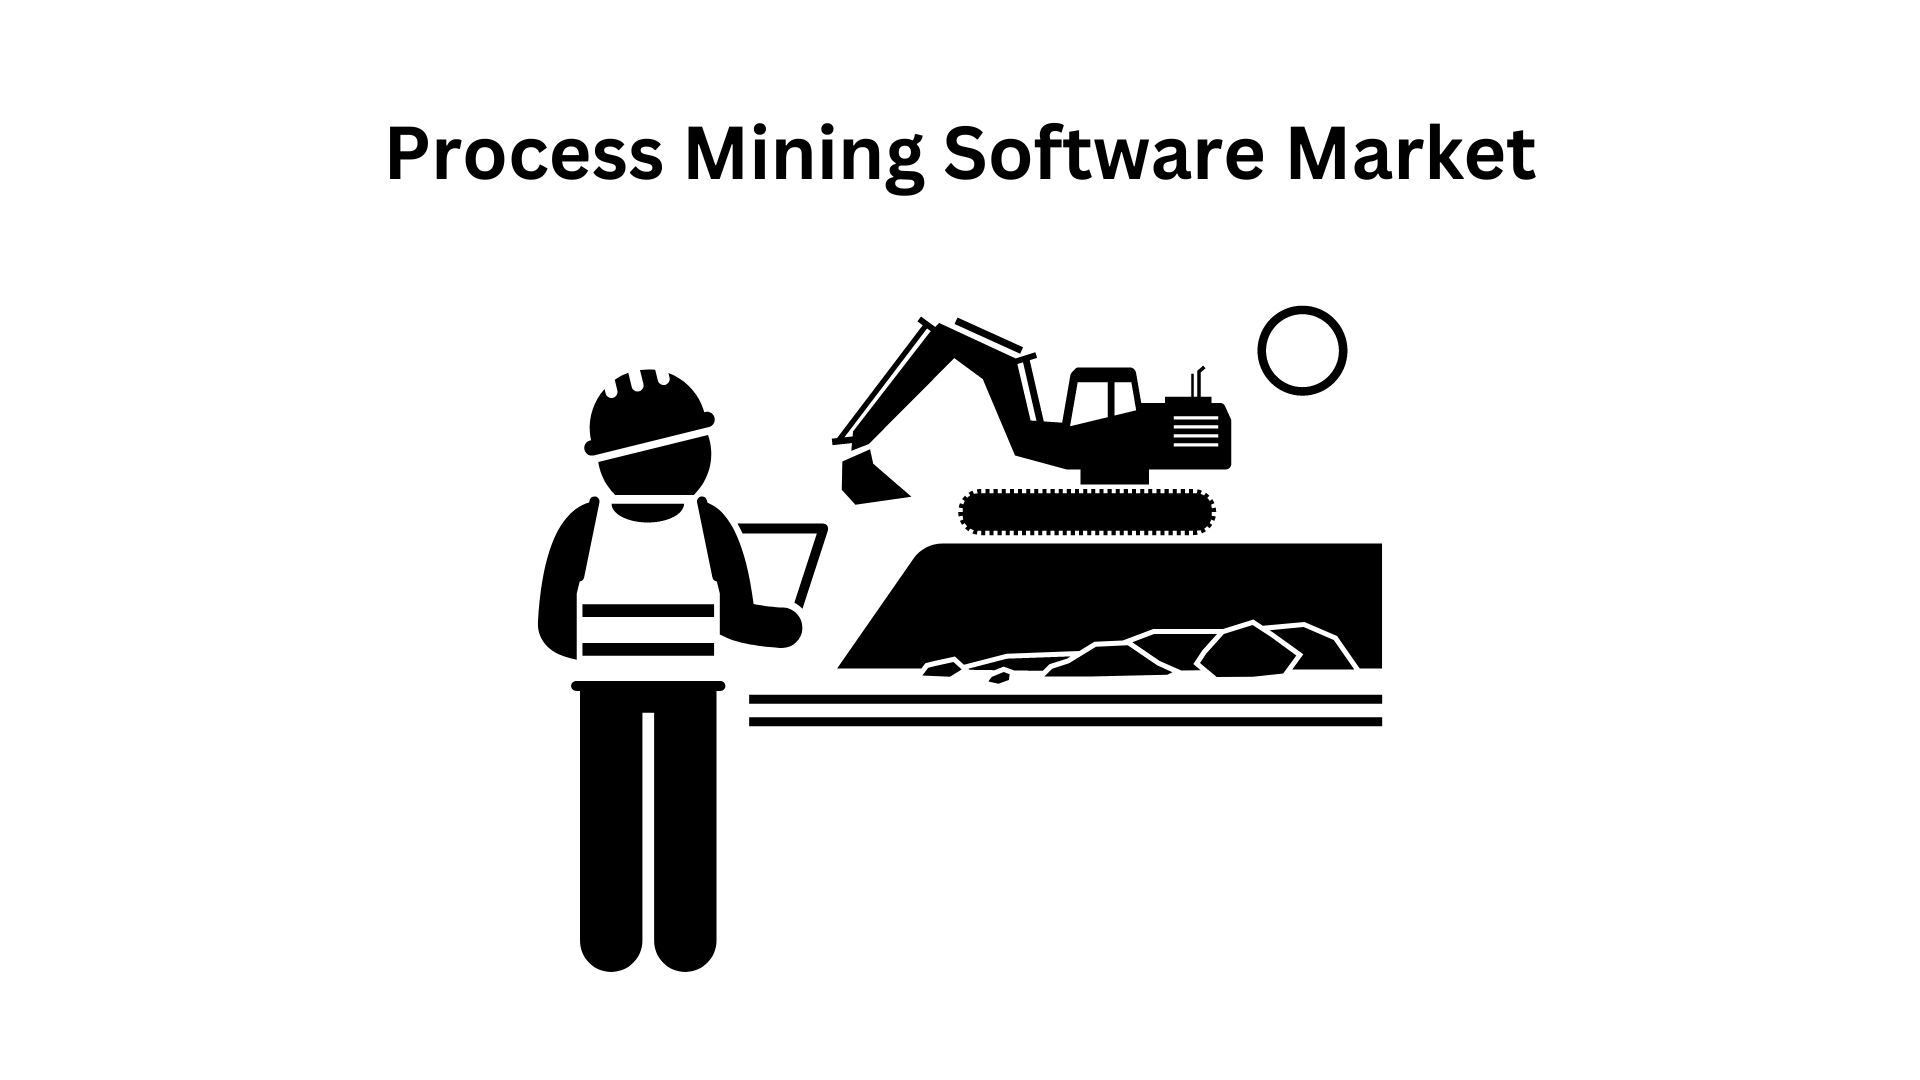 Global Process Mining Software Market is expected to reach USD 67.83 Bn by 2033 | CAGR of 49.7%